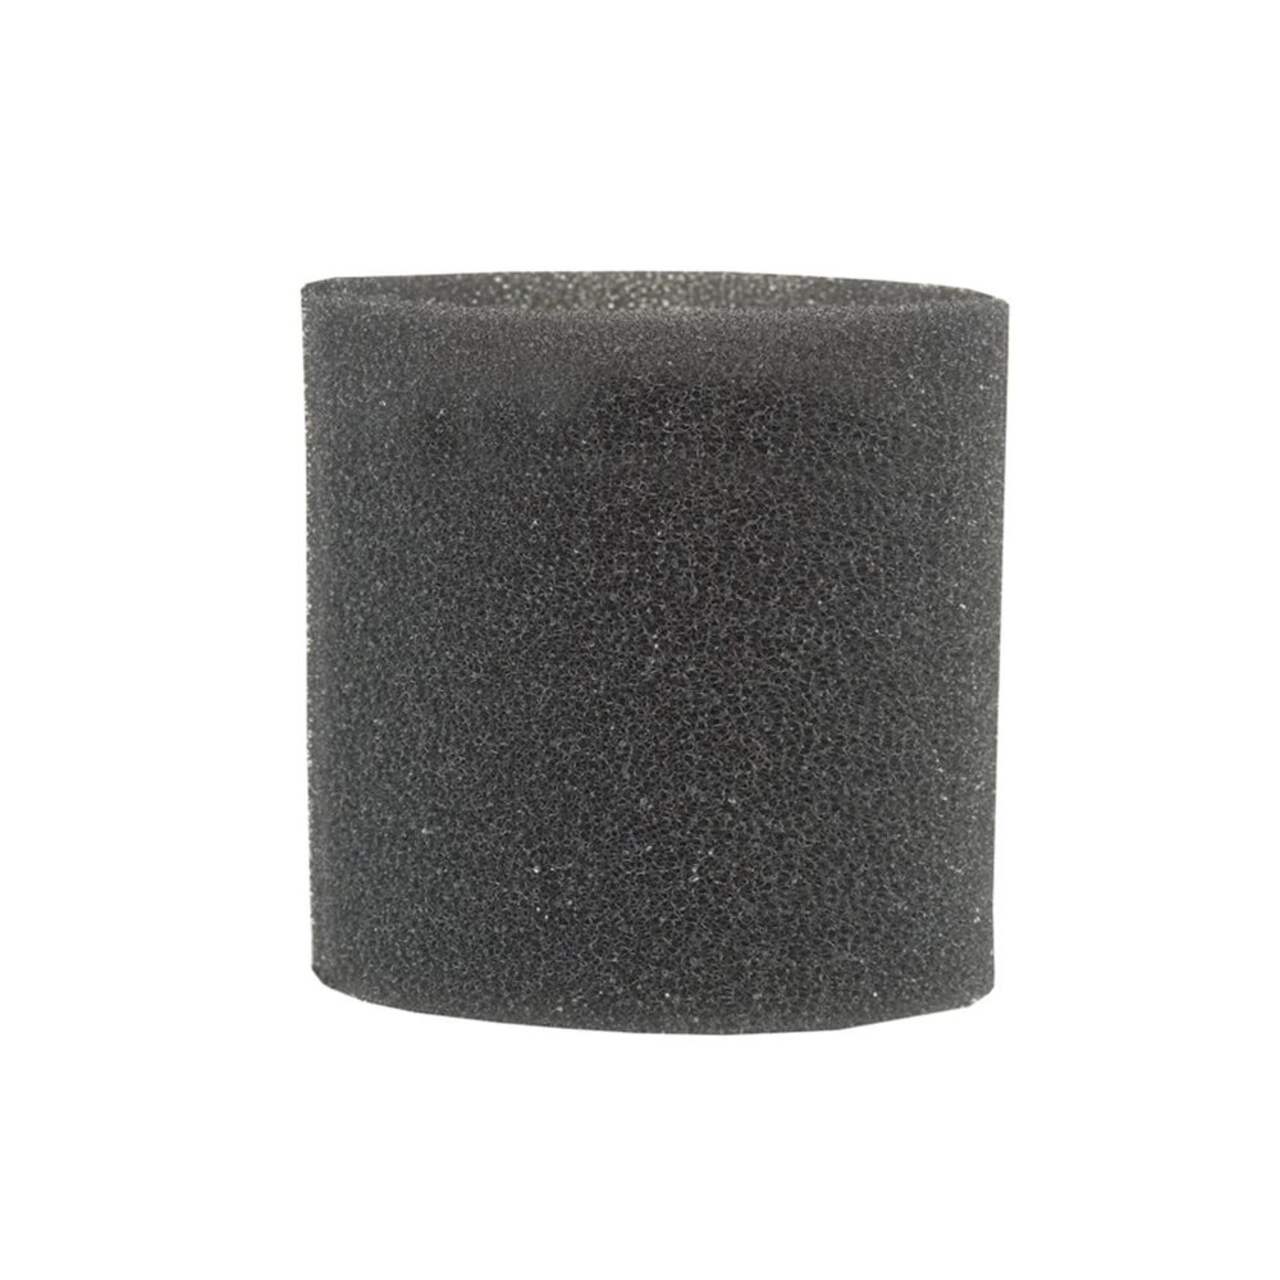 Shop-Vac® CVCFS2 Multi-Fit Standard Foam Sleeve for Shop-Vac® and Mastervac  Wet/Dry Shop Vacuums